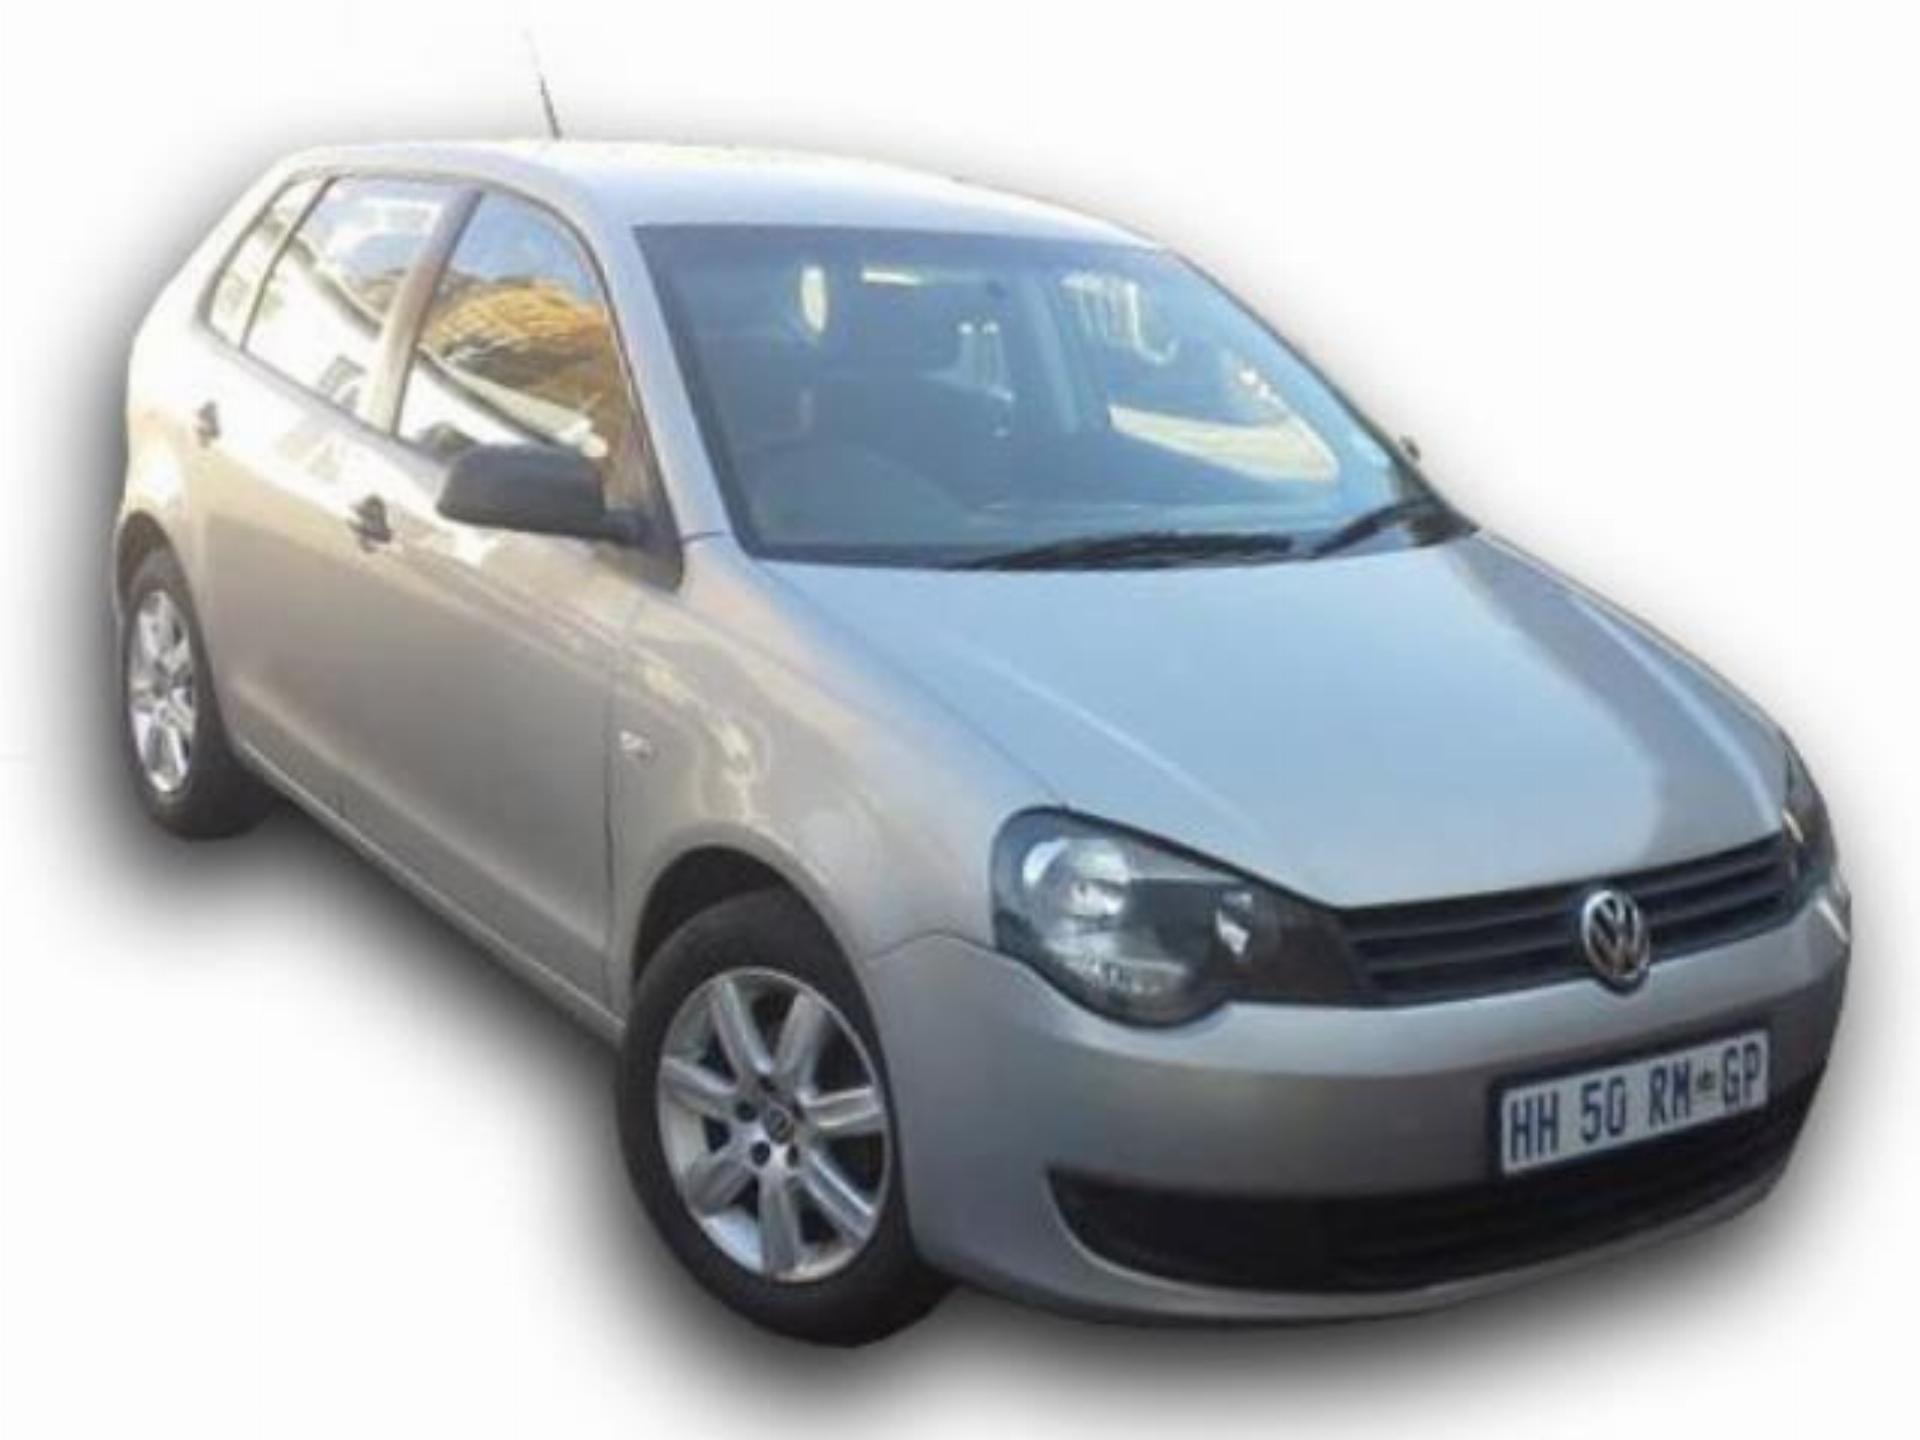 Used Volkswagen Polo Vivo 1.4 2013 on auction PV1025573